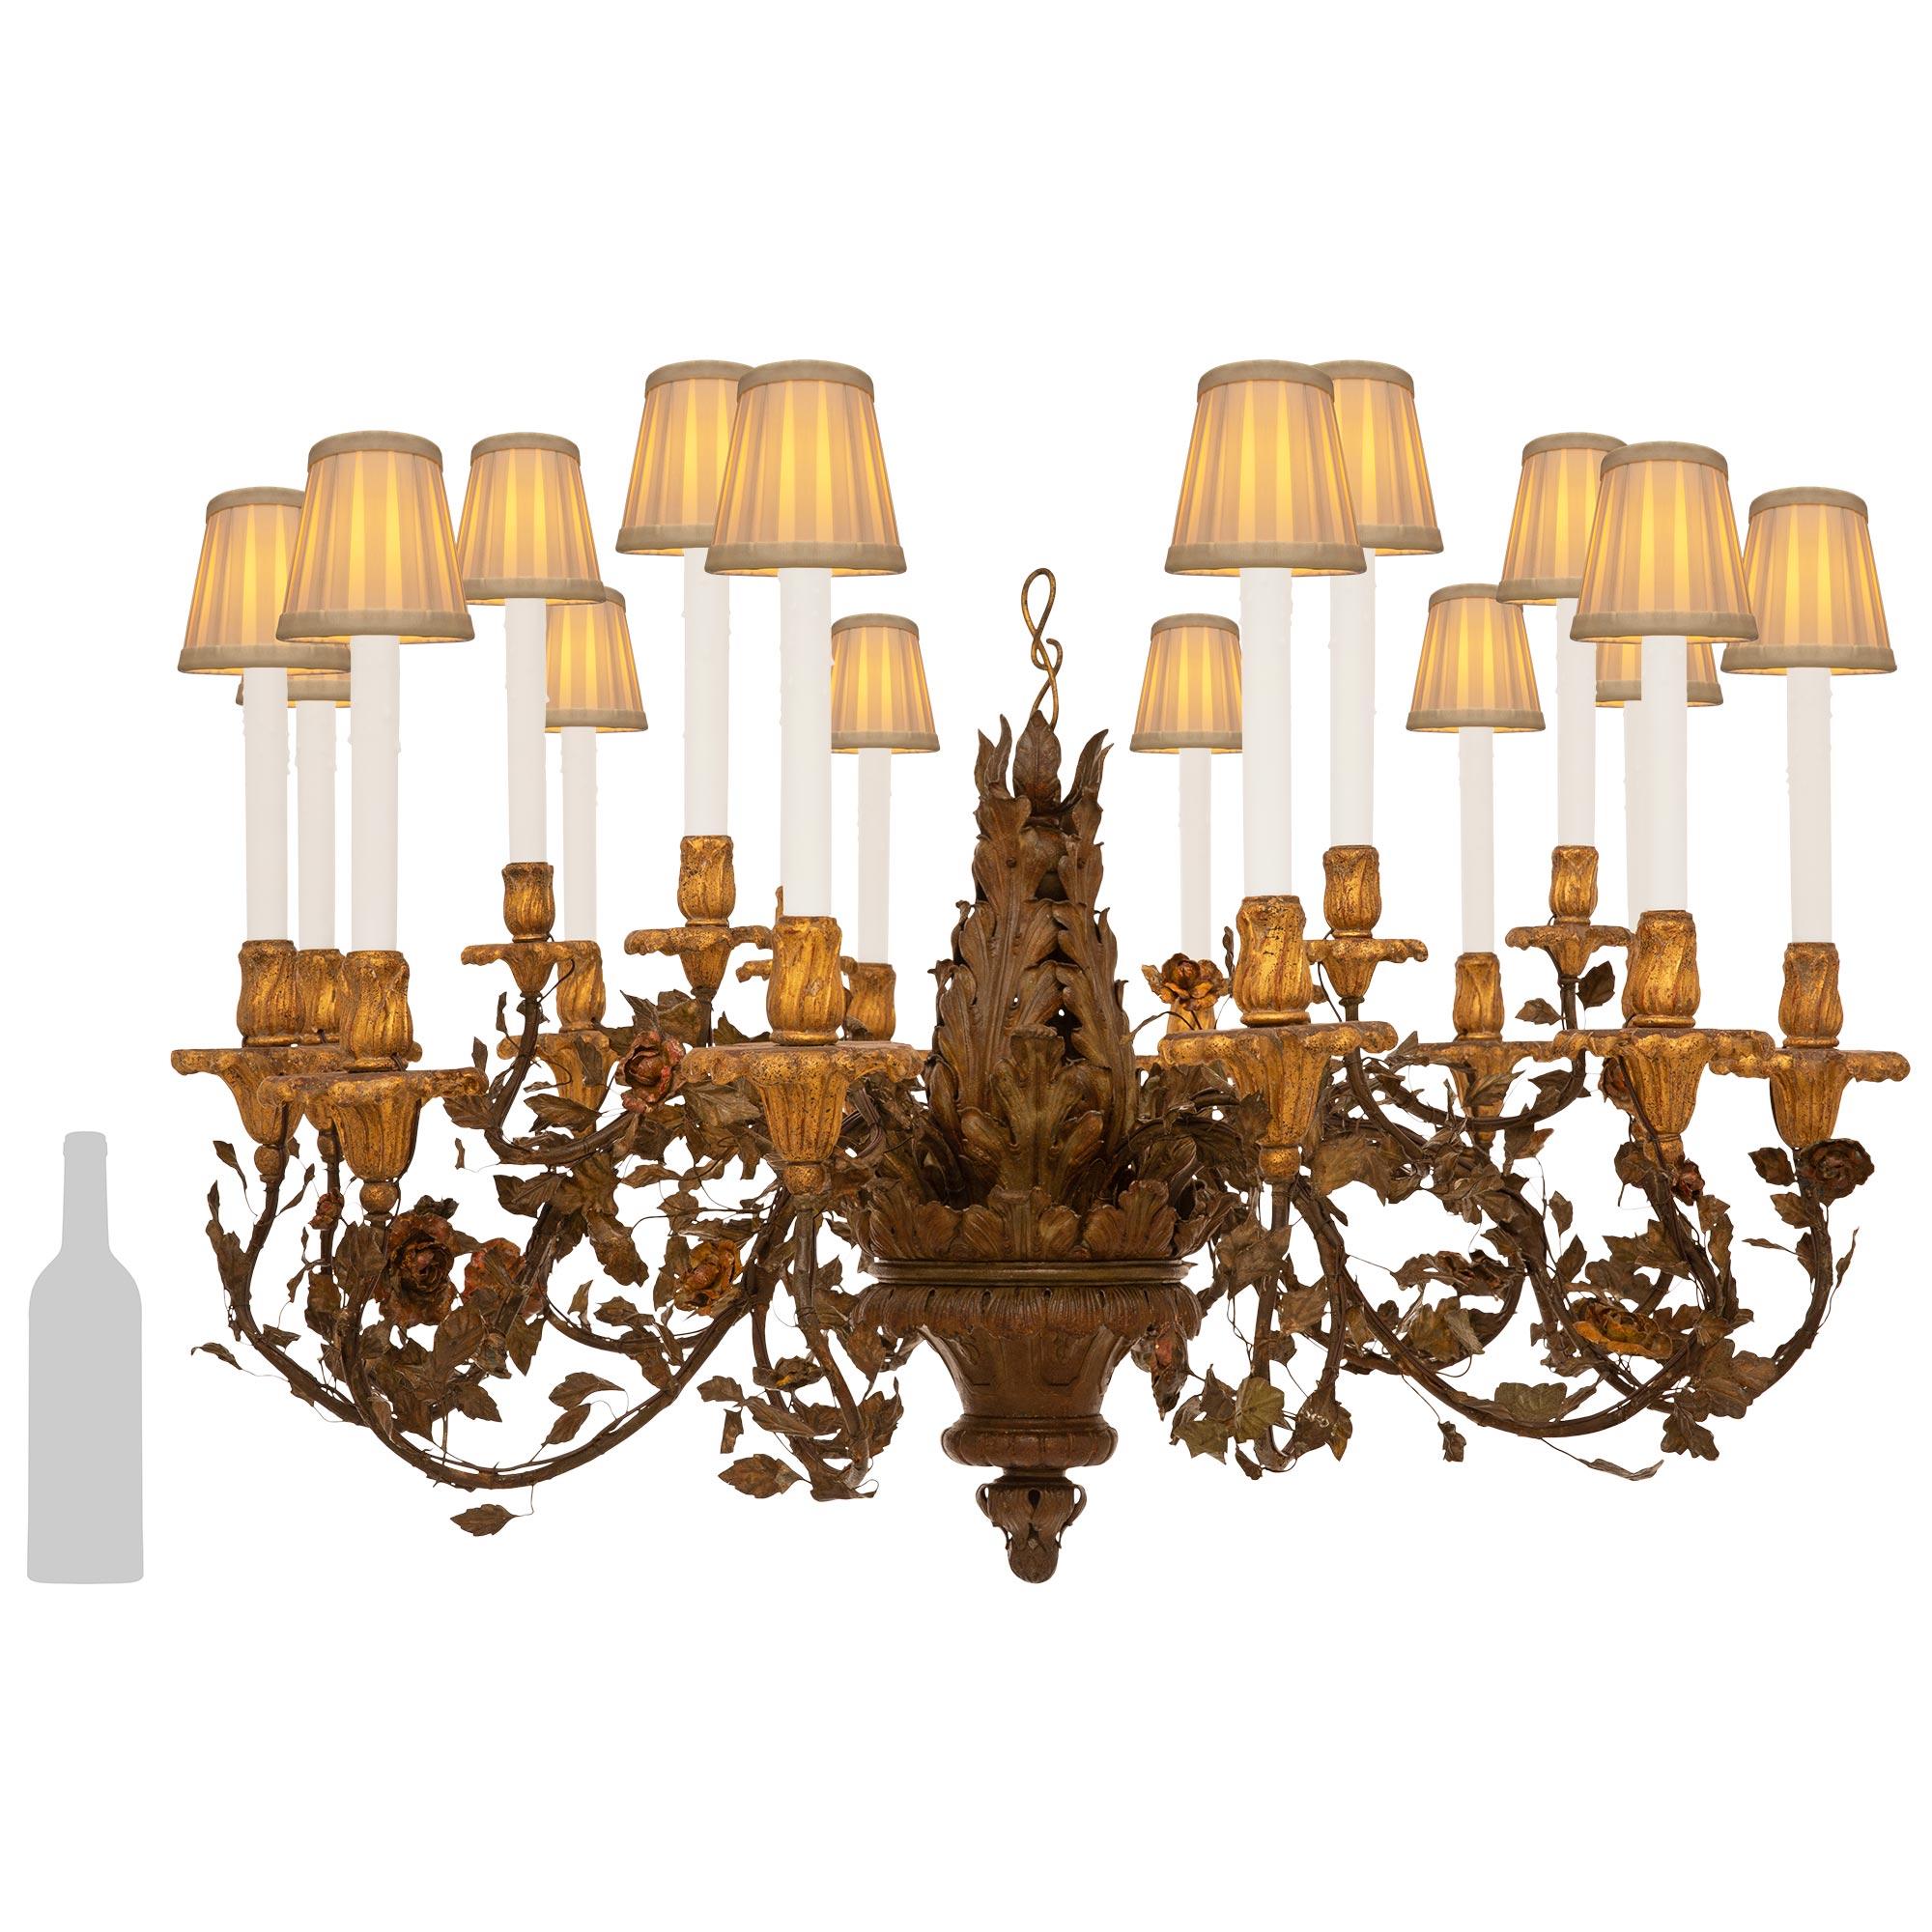 A very handsome and highly detailed pair of Italian 19th century Baroque st. Iron, Tole, Giltwood, and patinated Bronze chandeliers. Each stunning eighteen arm eighteen light chandelier is centered by an acorn bottom finial with acanthus leaves